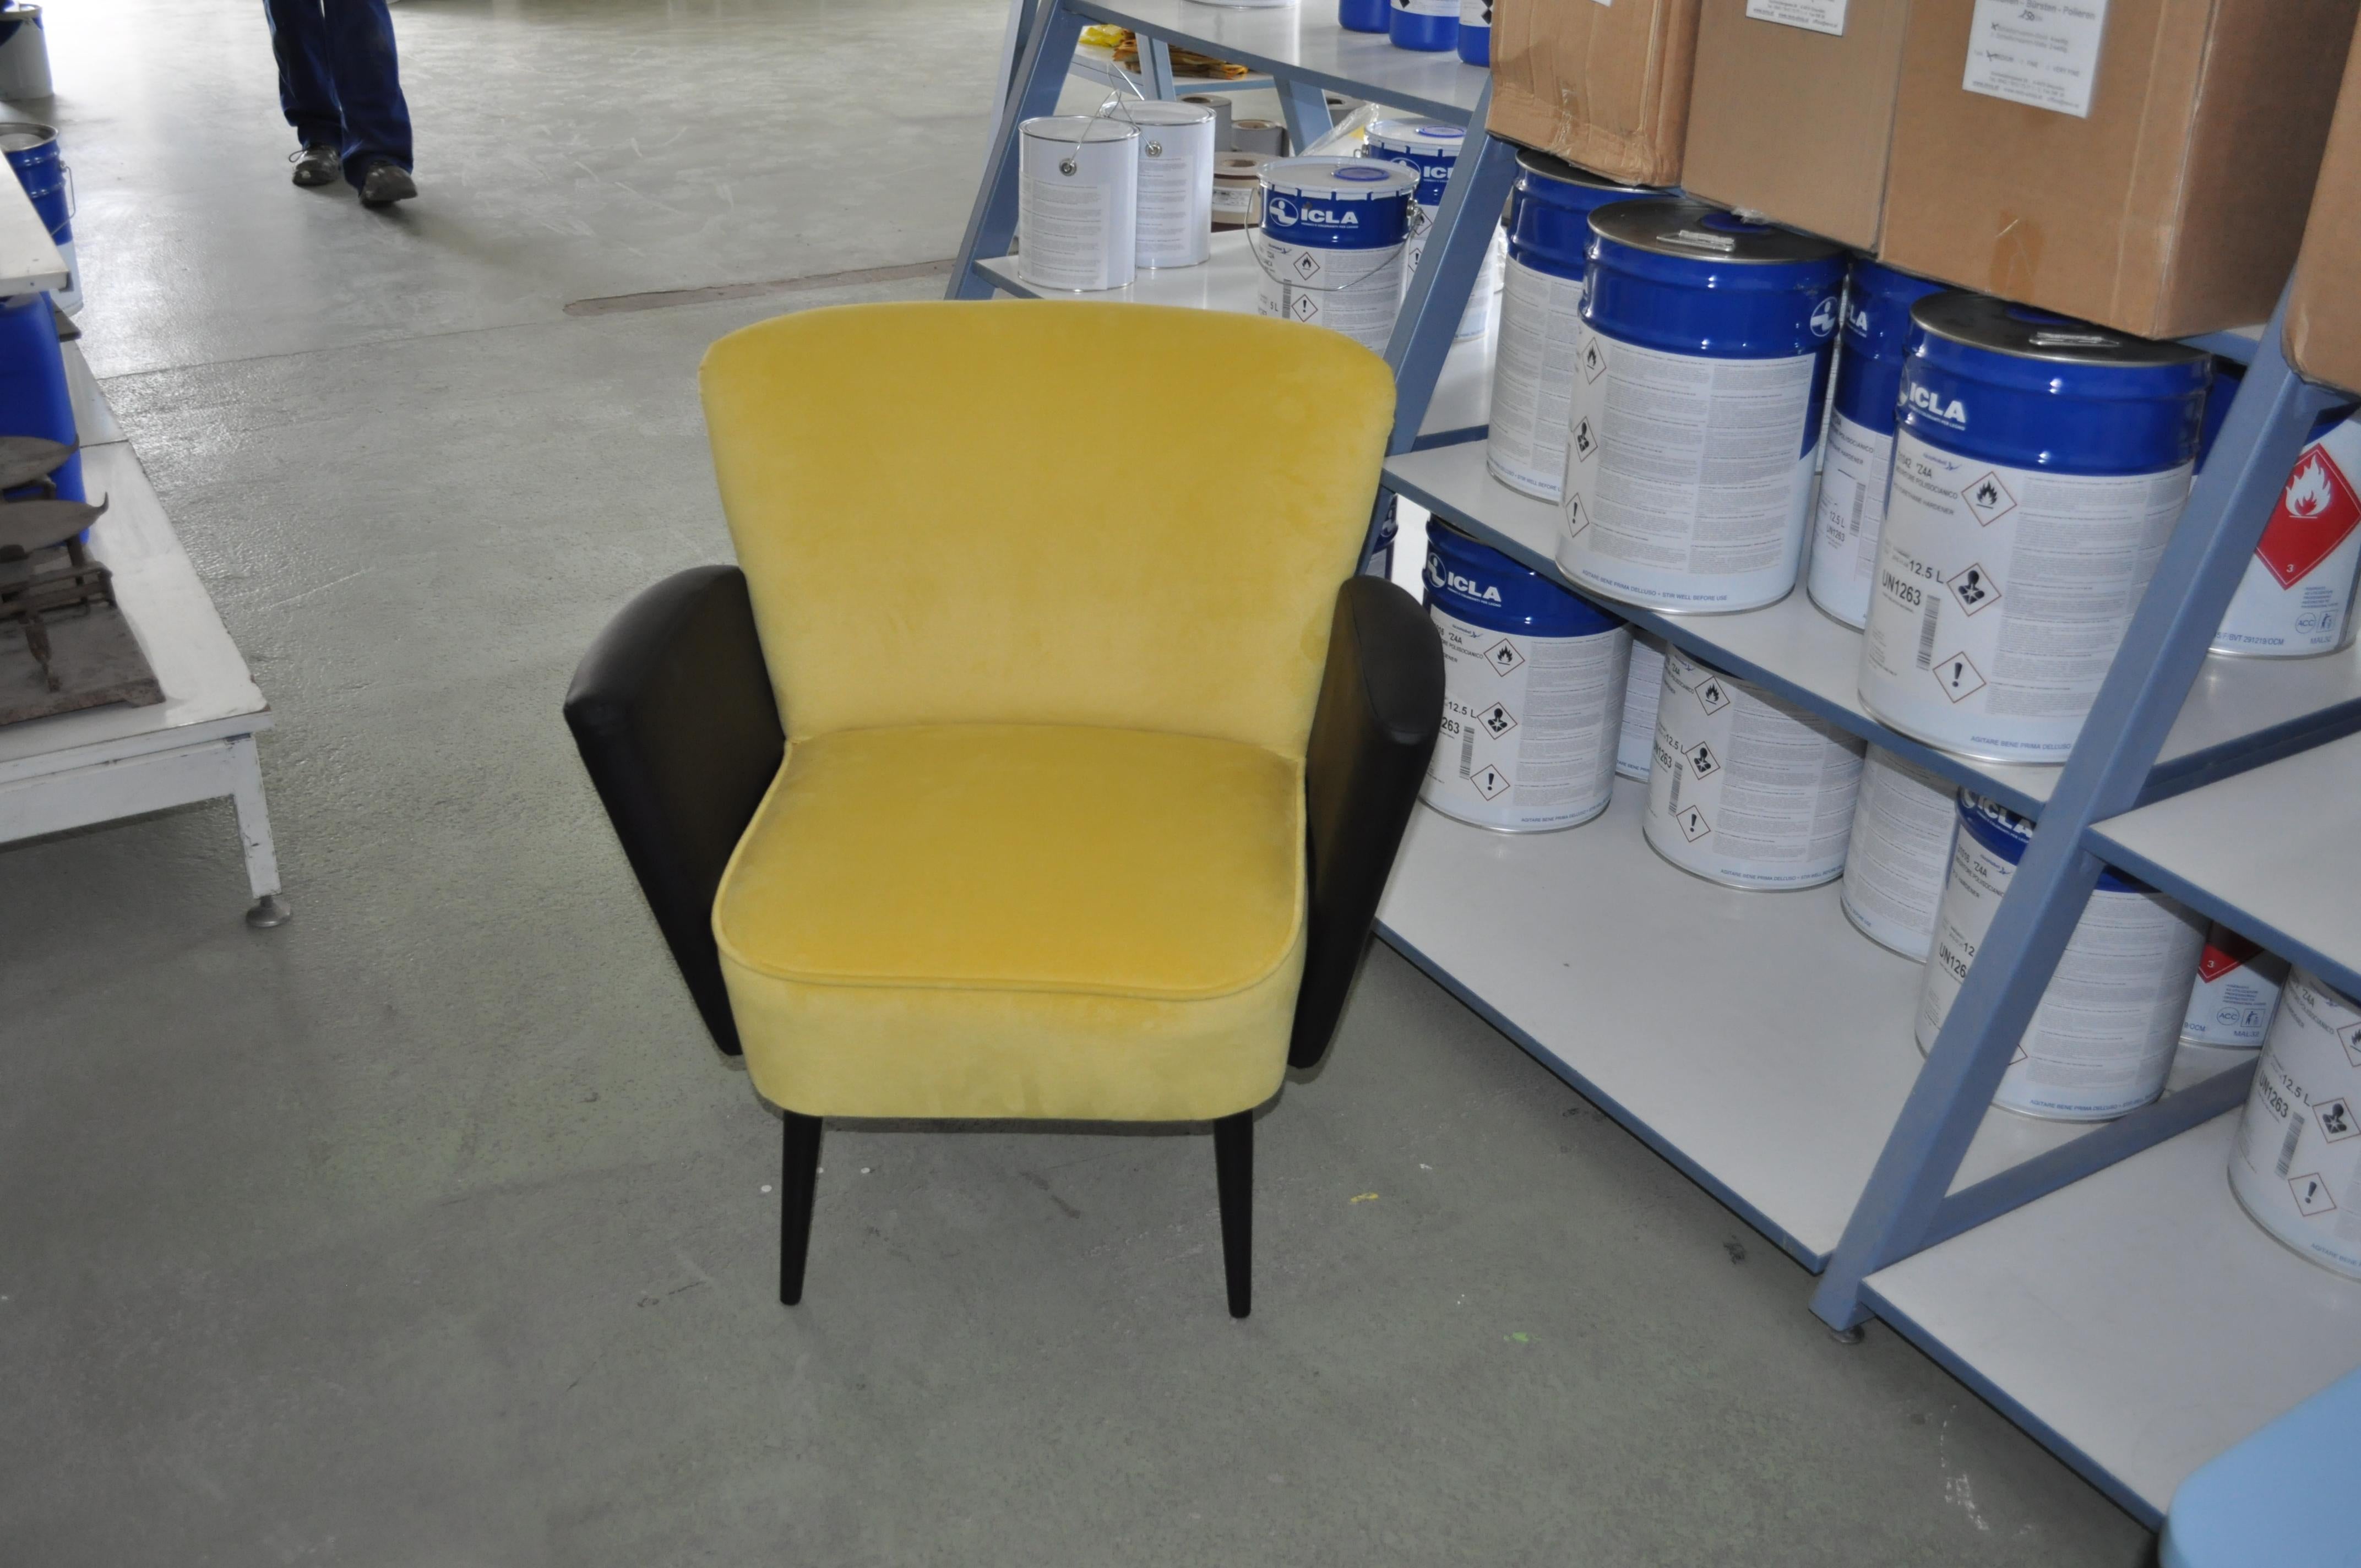 1950s cocktail chairs, pair.

1950s cocktail chairs. Very well constructed, extremely comfortable. The pair was fully and professionally re-upholstered with a yellow colored velvet fabric and black leatherette the condition is excellent, the